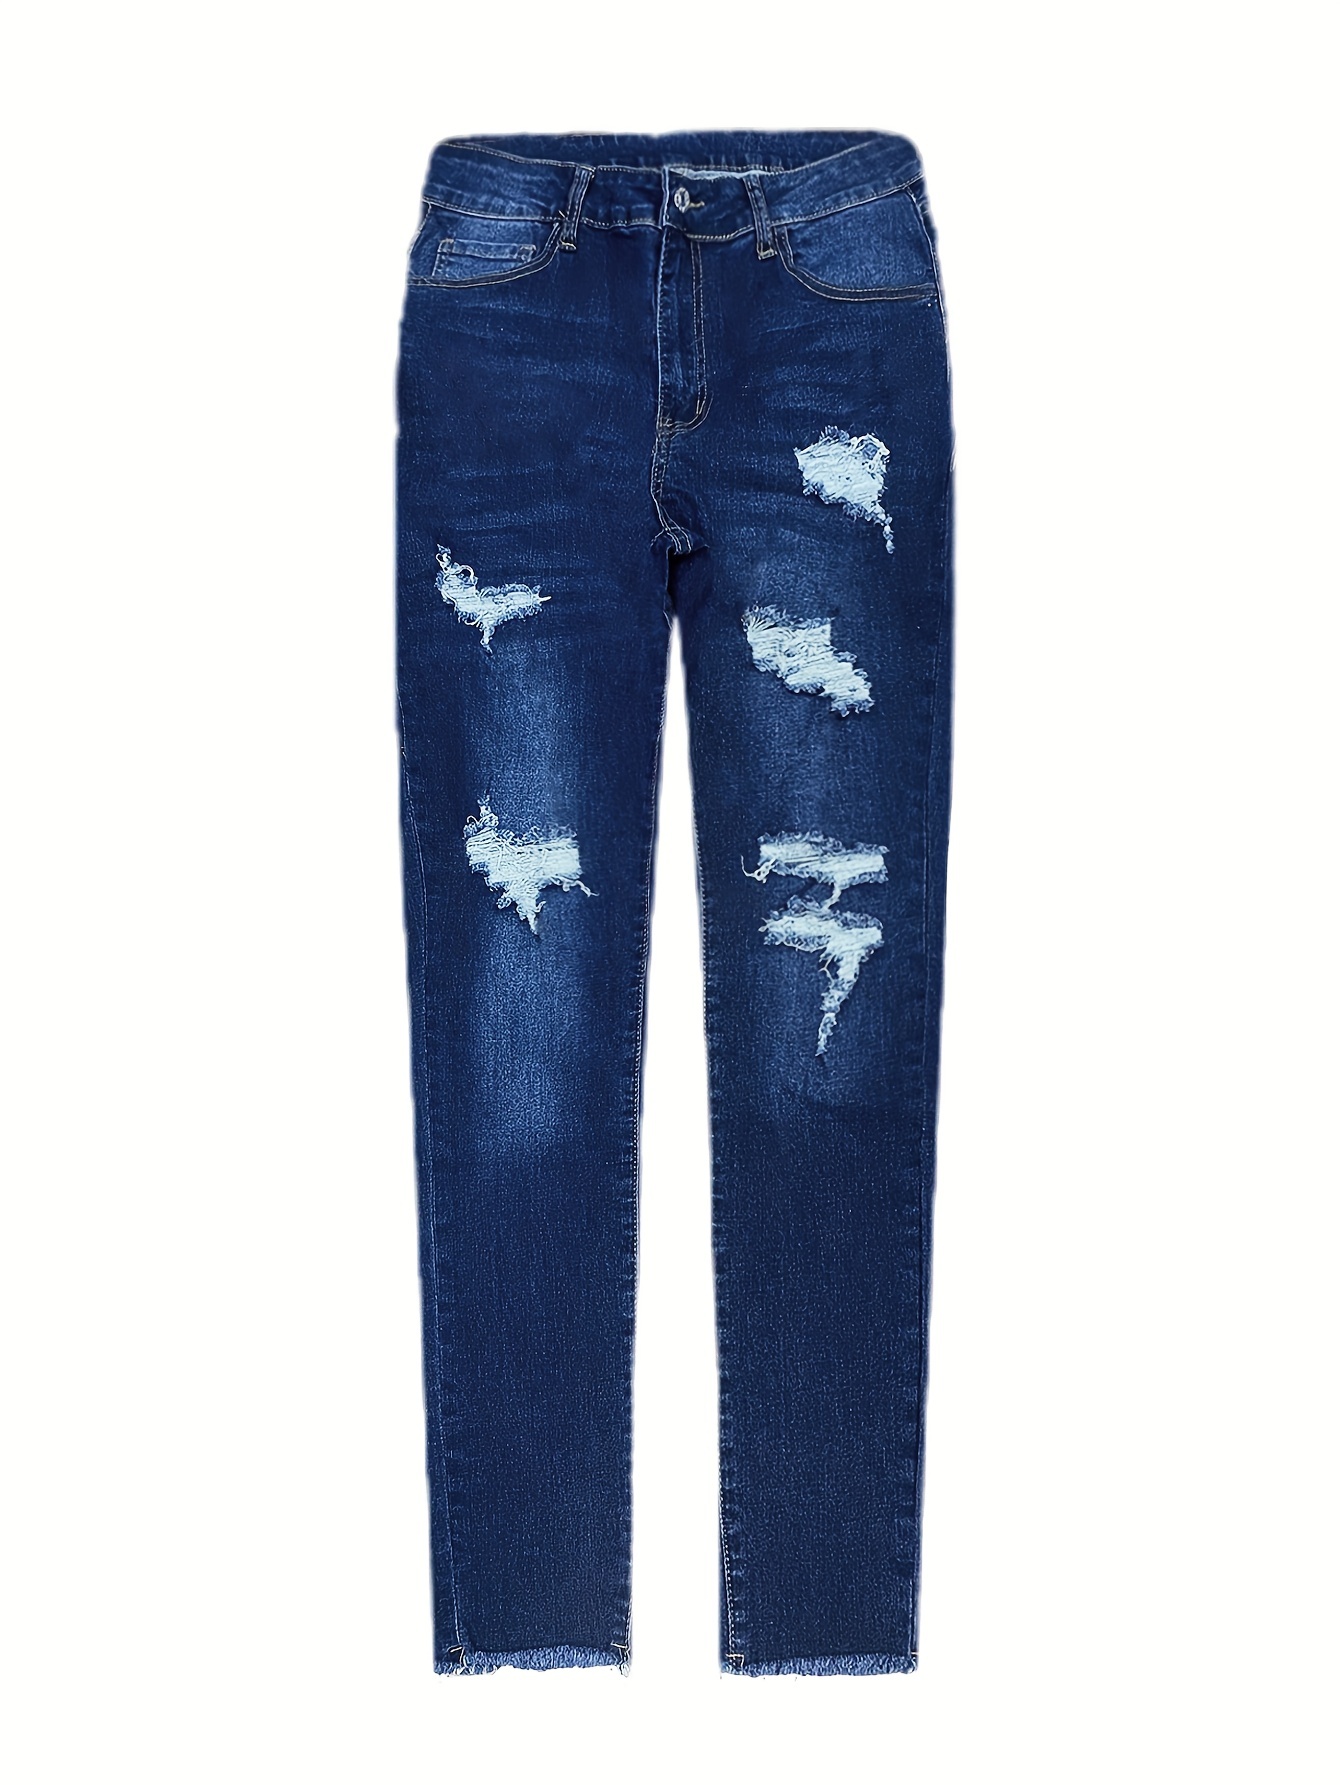 Ripped Distressed Knee Cut Jeans, High Strech Whiskering Skinny Denim  Pants, Sexy & Stylish, Women's Denim Jeans & Clothing